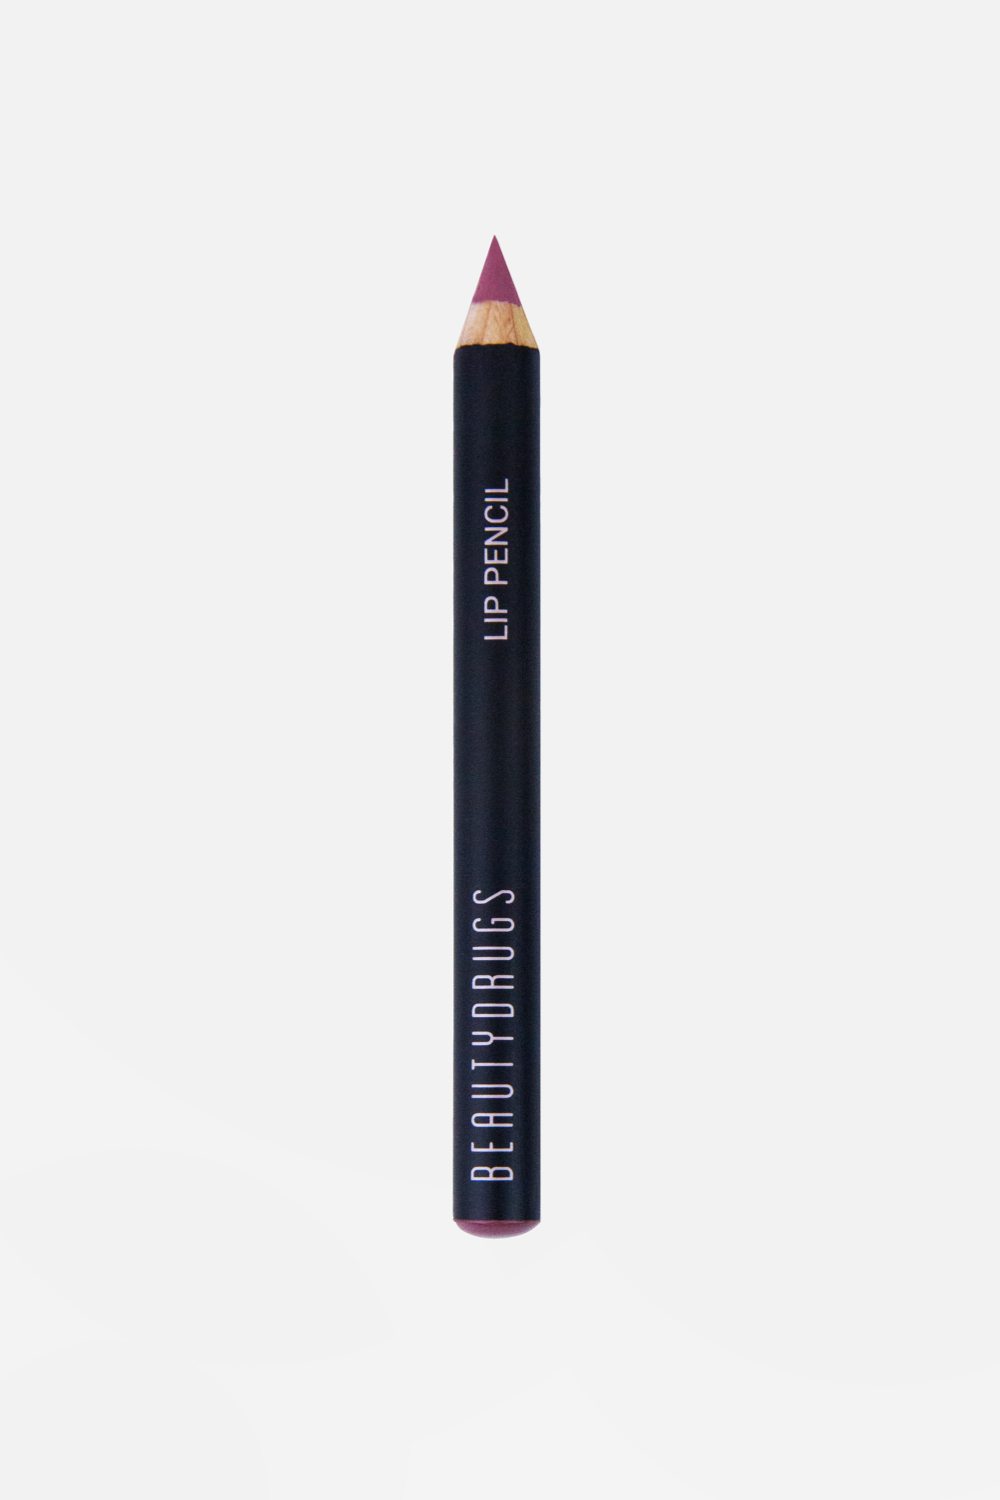 BEAUTYDRUGS Lip Gloss Pencil -   04 Isabelle